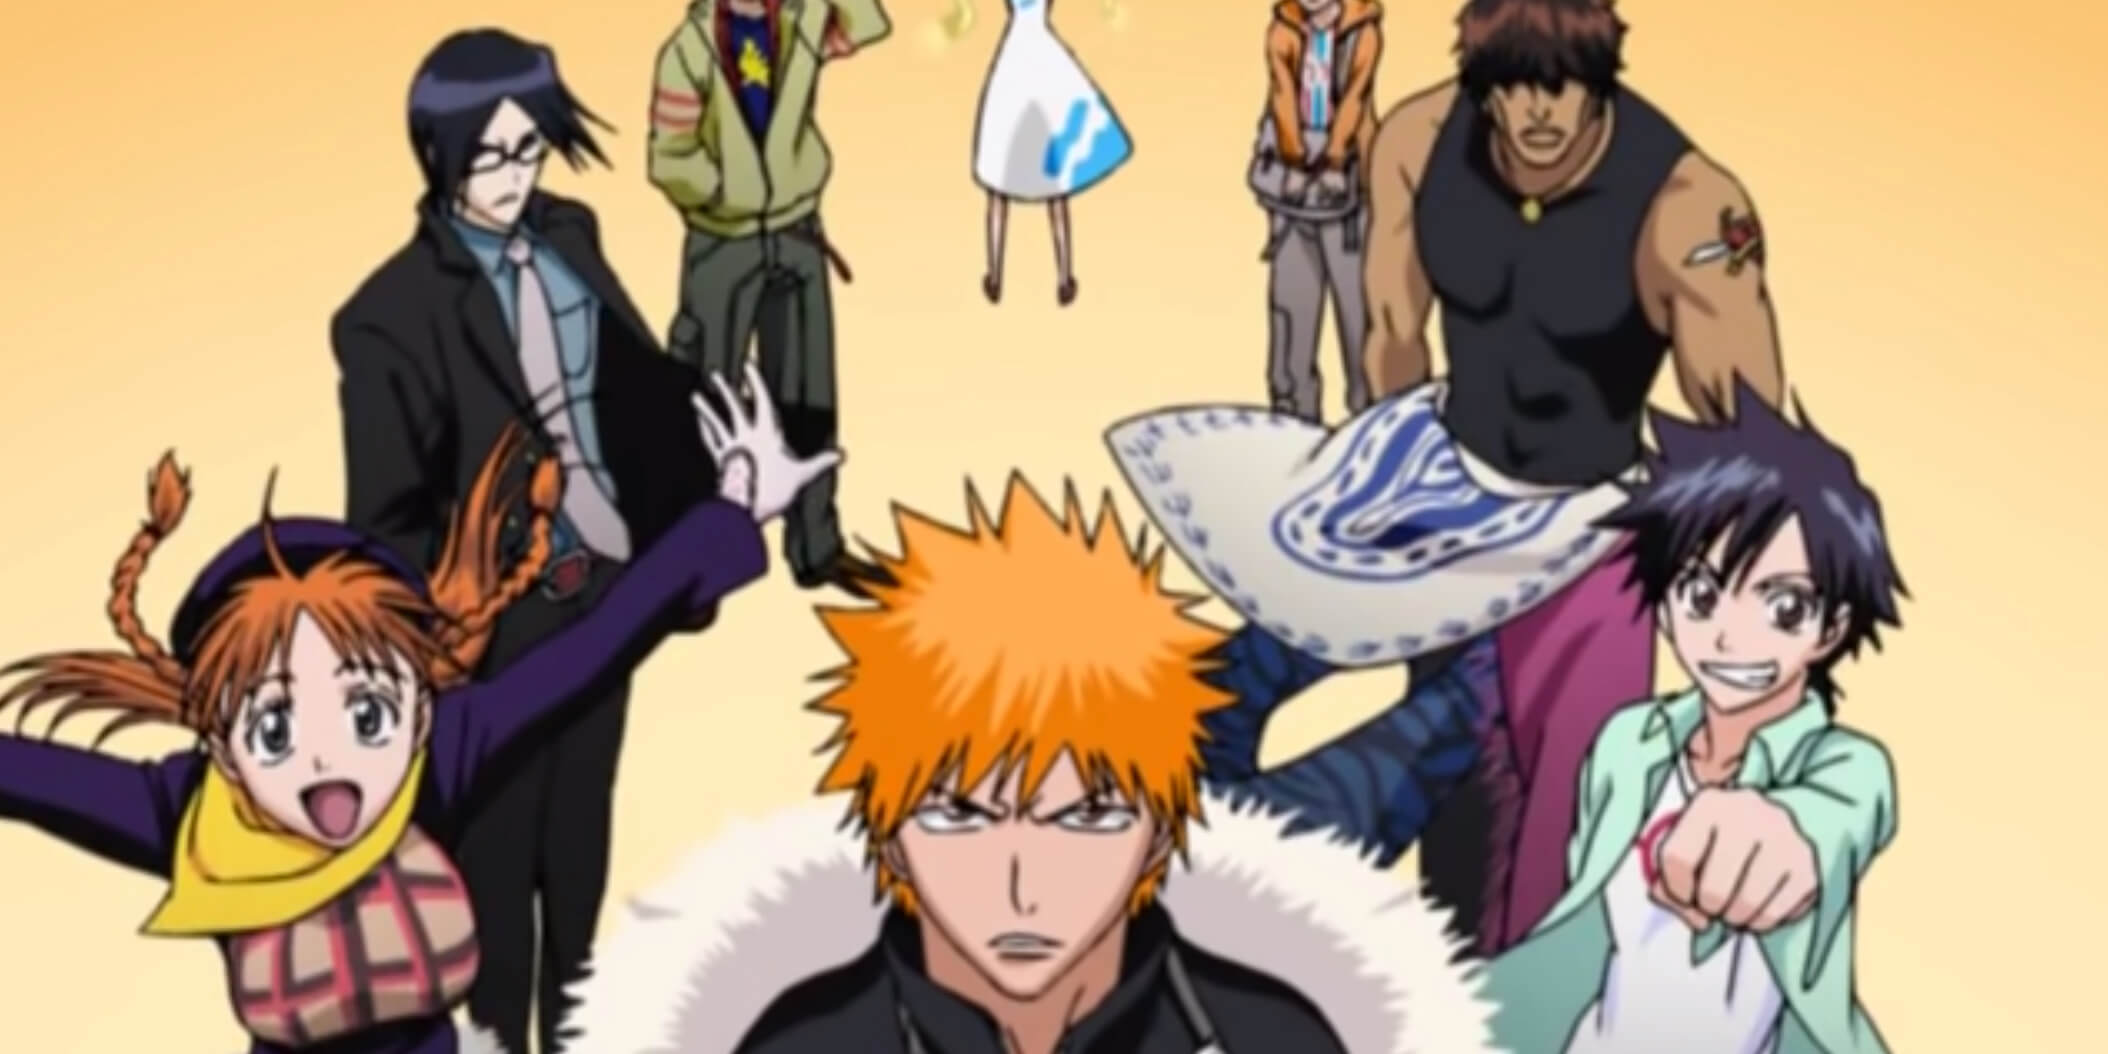 Have Bleach Voice Actors Been Approached Yet For Bleach's Return?